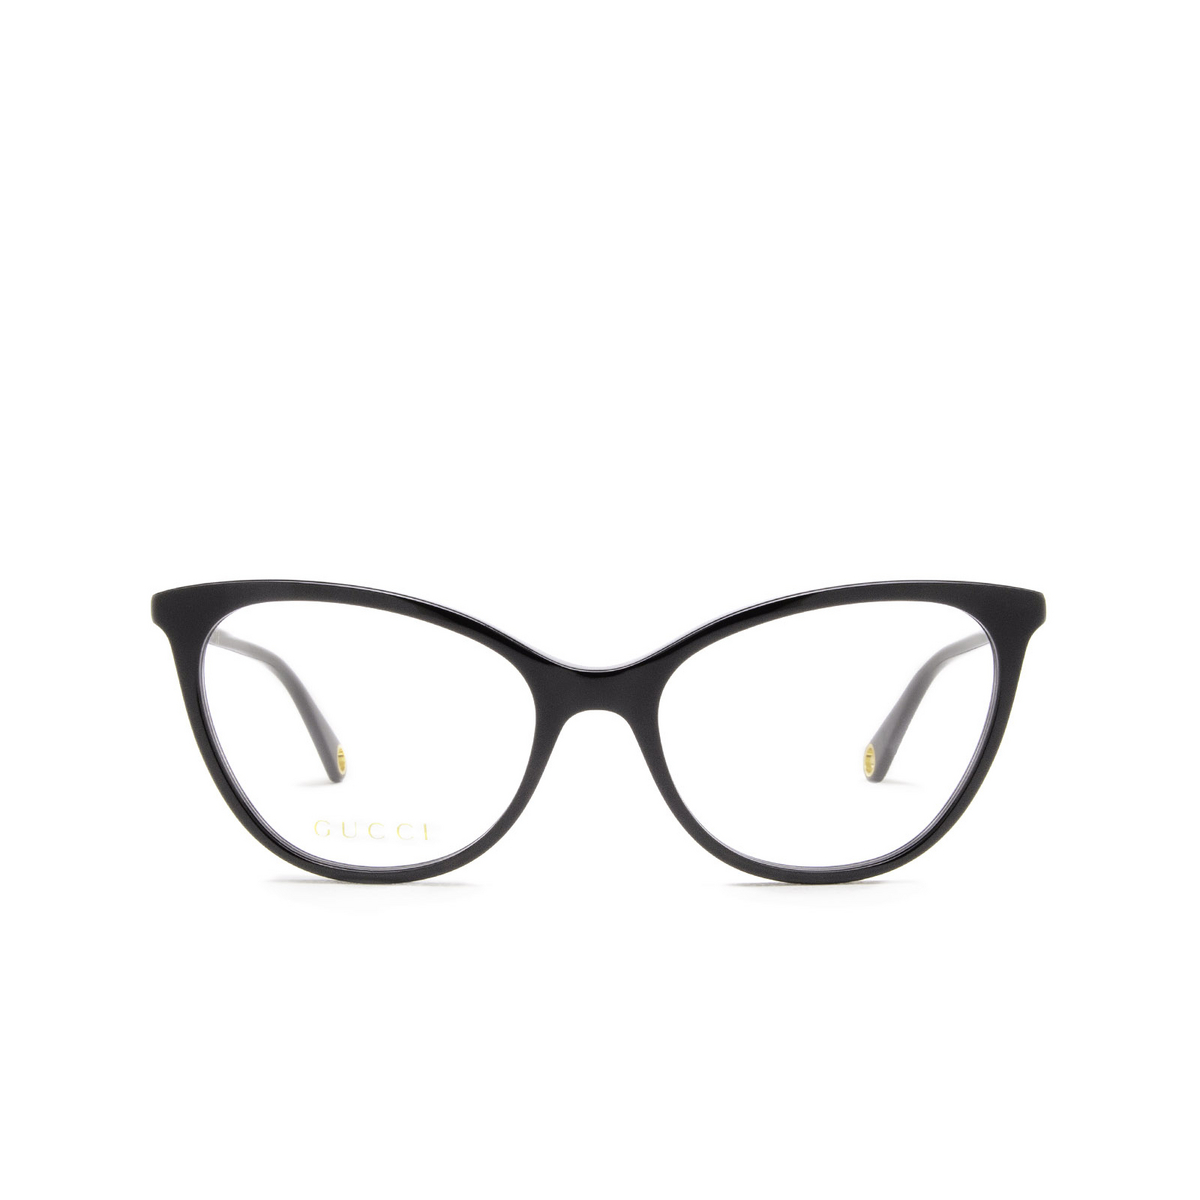 Gucci® Cat-eye Eyeglasses: GG1079O color 001 Black - front view